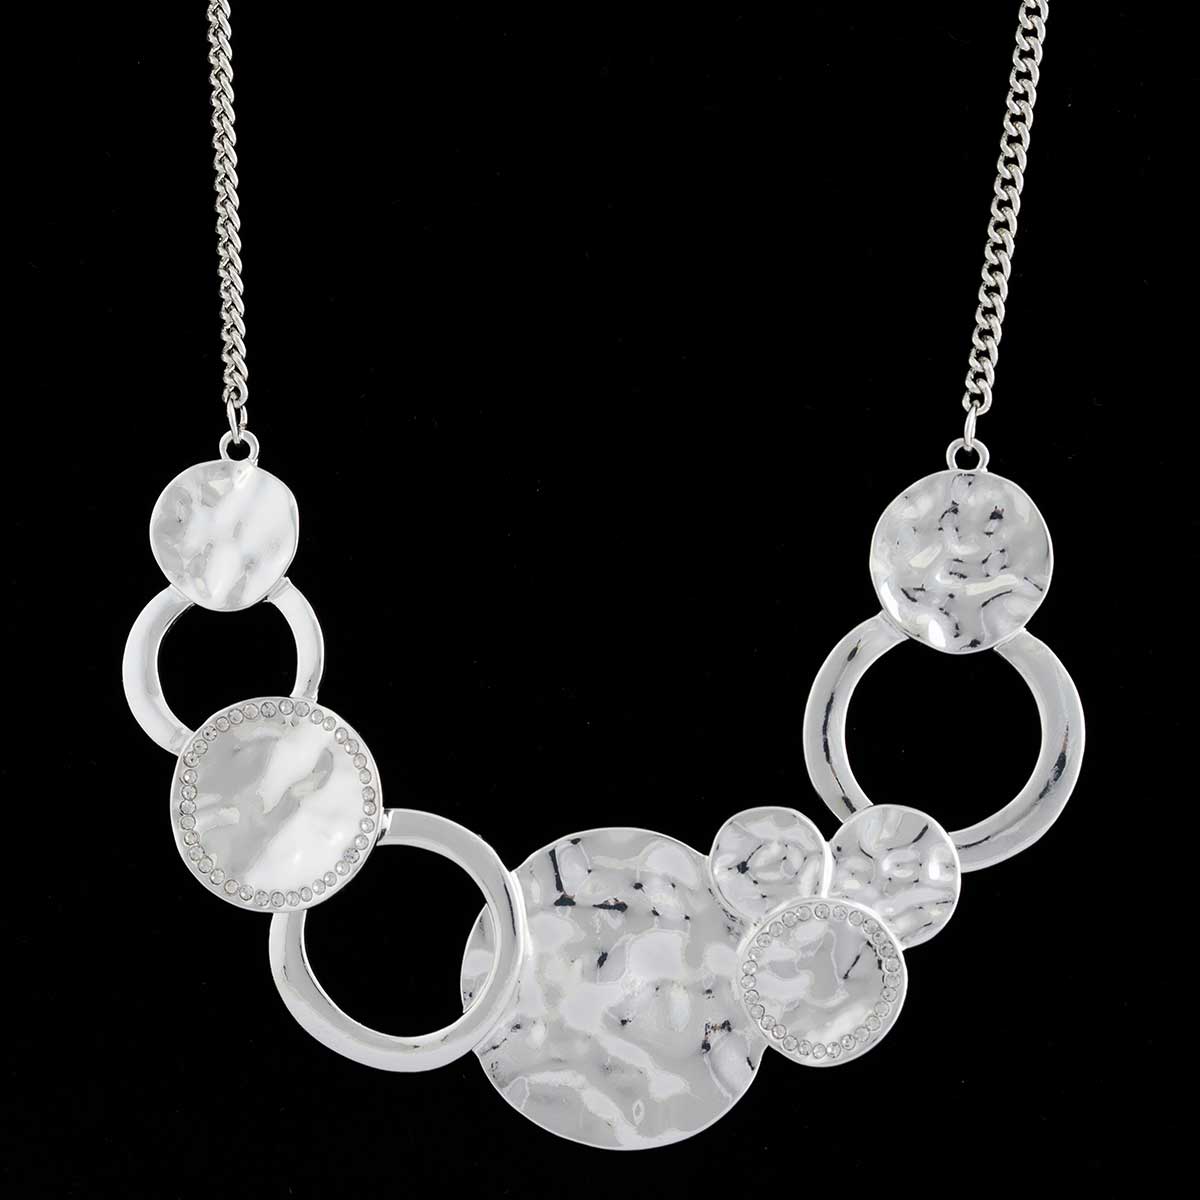 Silver Hammered Disc and Circle Bib Necklace on Chain 16"to19"